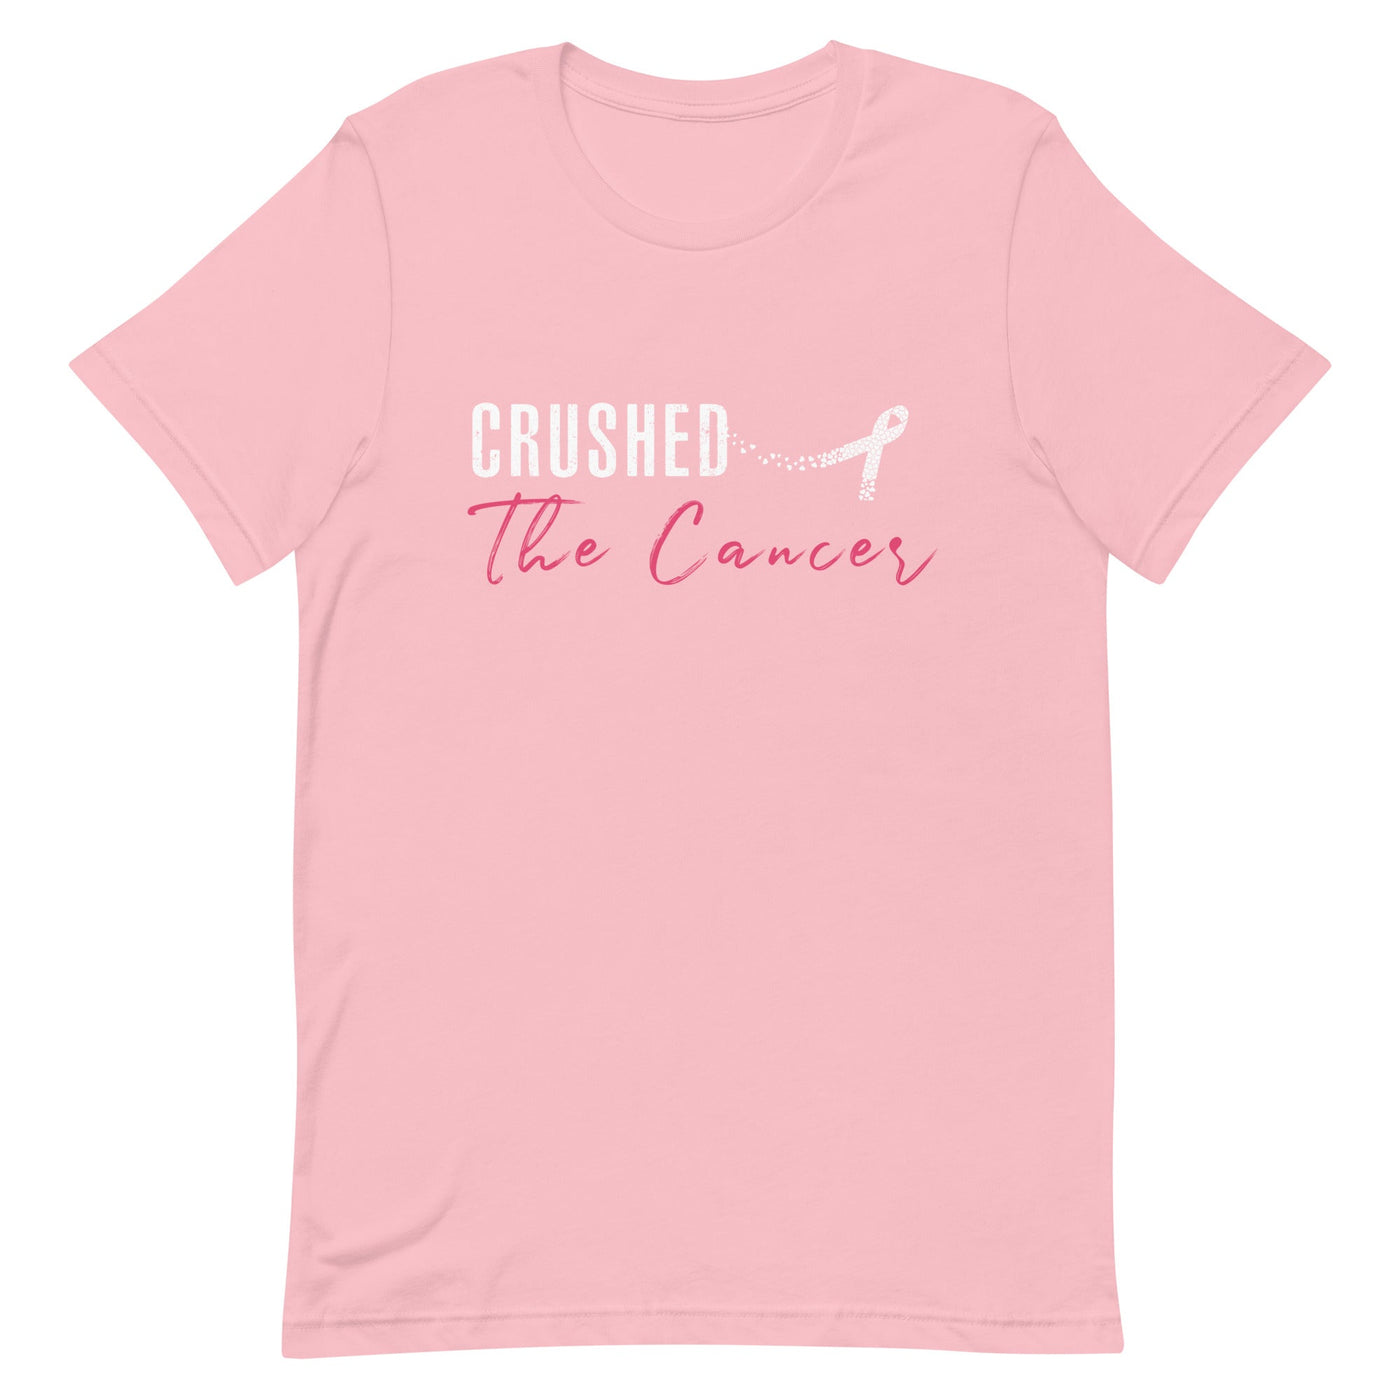 CRUSHED THE CANCER WOMEN'S T-SHIRT- WHITE AND PINK FONT Pink S 